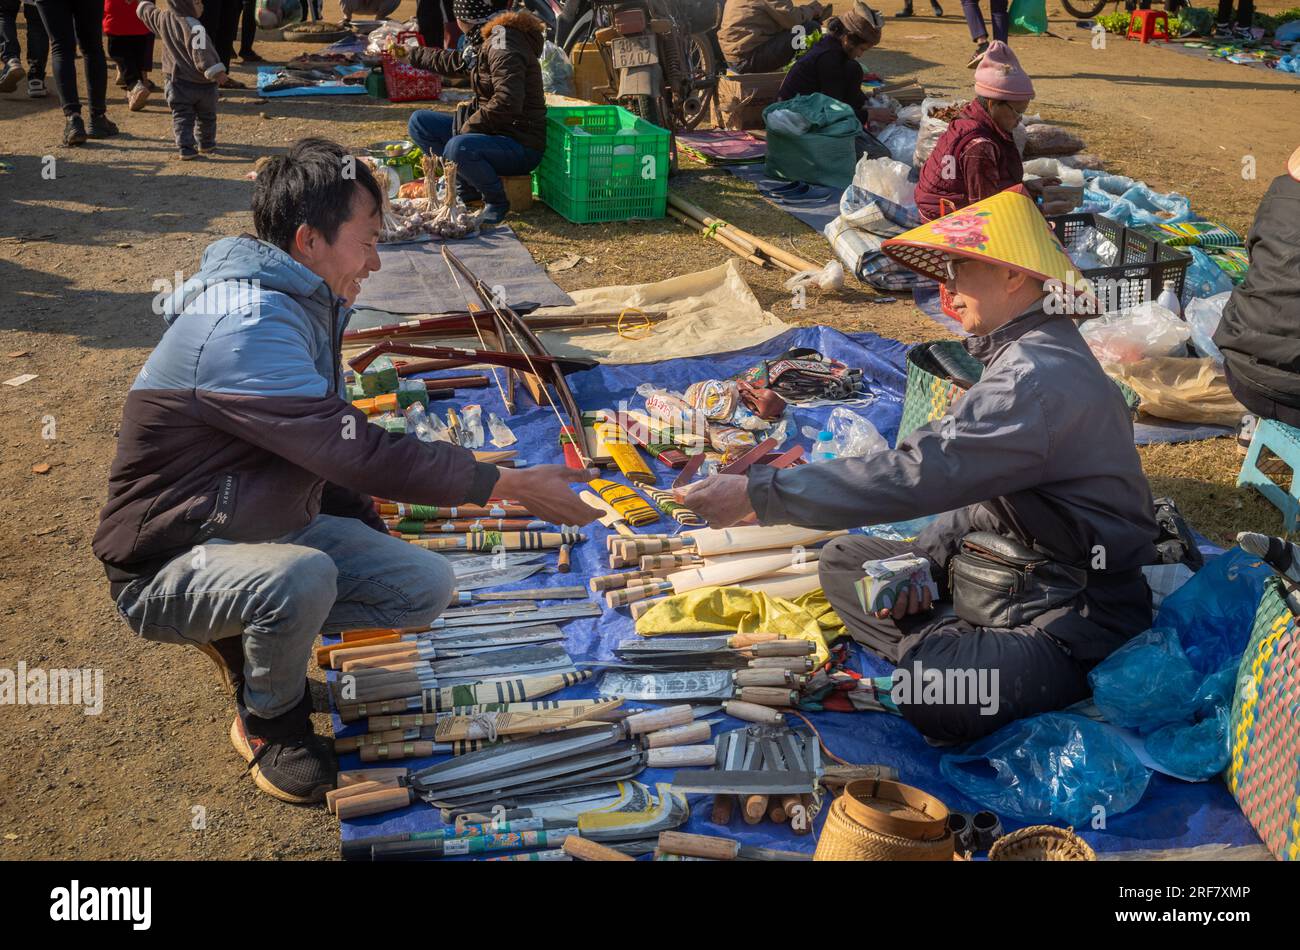 A White Thai ethnic minority man buys a handmade knife at a knife stall in a busty open-air market in Mai Chau, Vietnam. Stock Photo